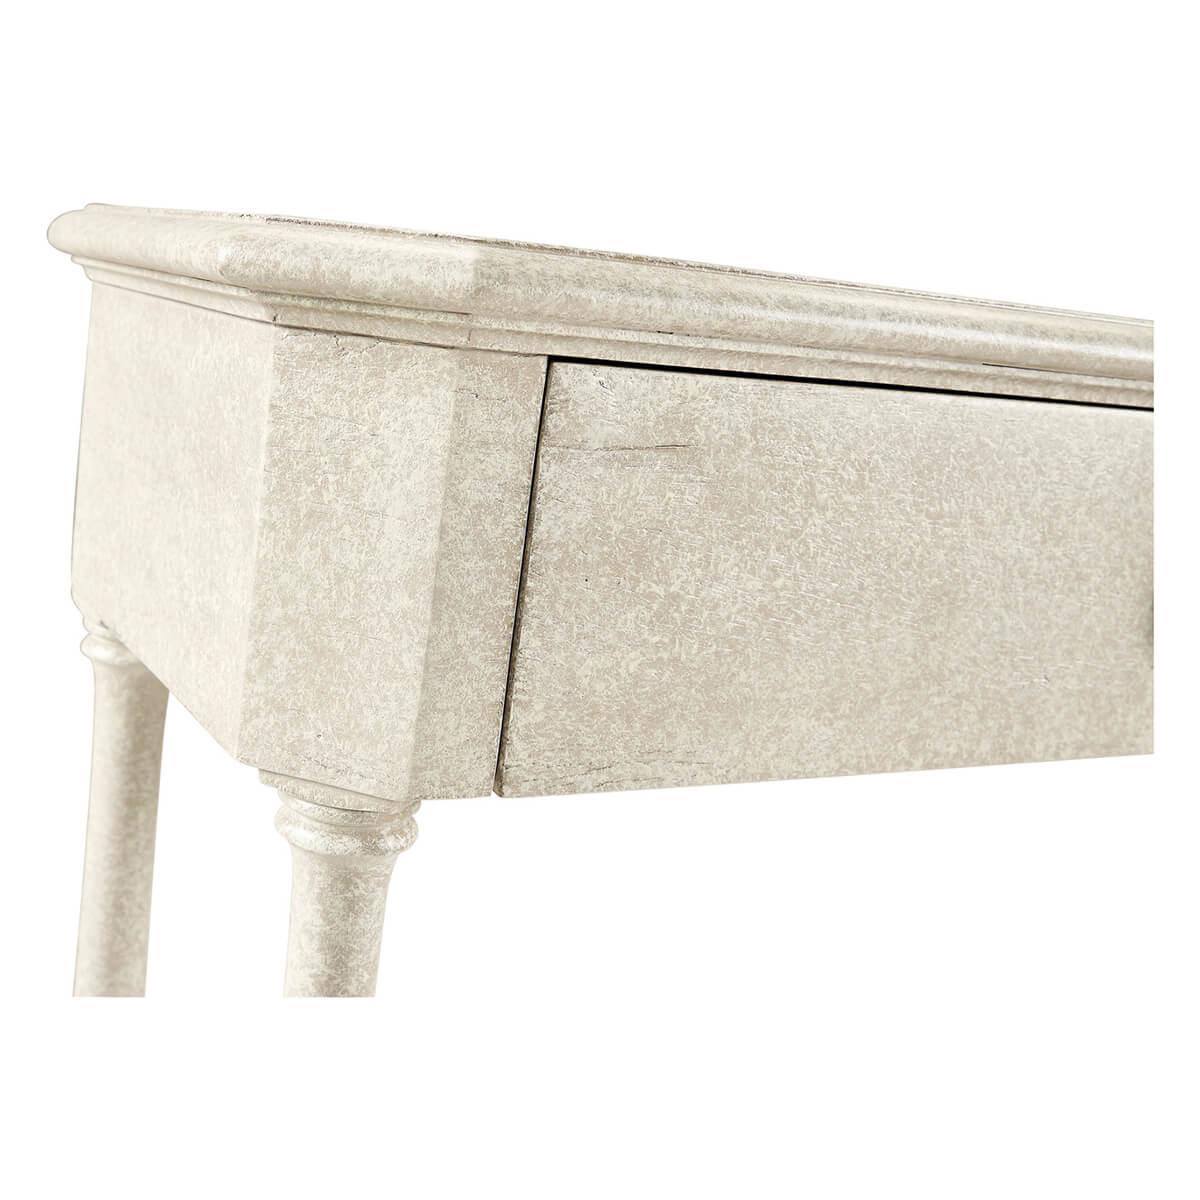 Vietnamese Georgian Rustic Whitewash Painted Console For Sale